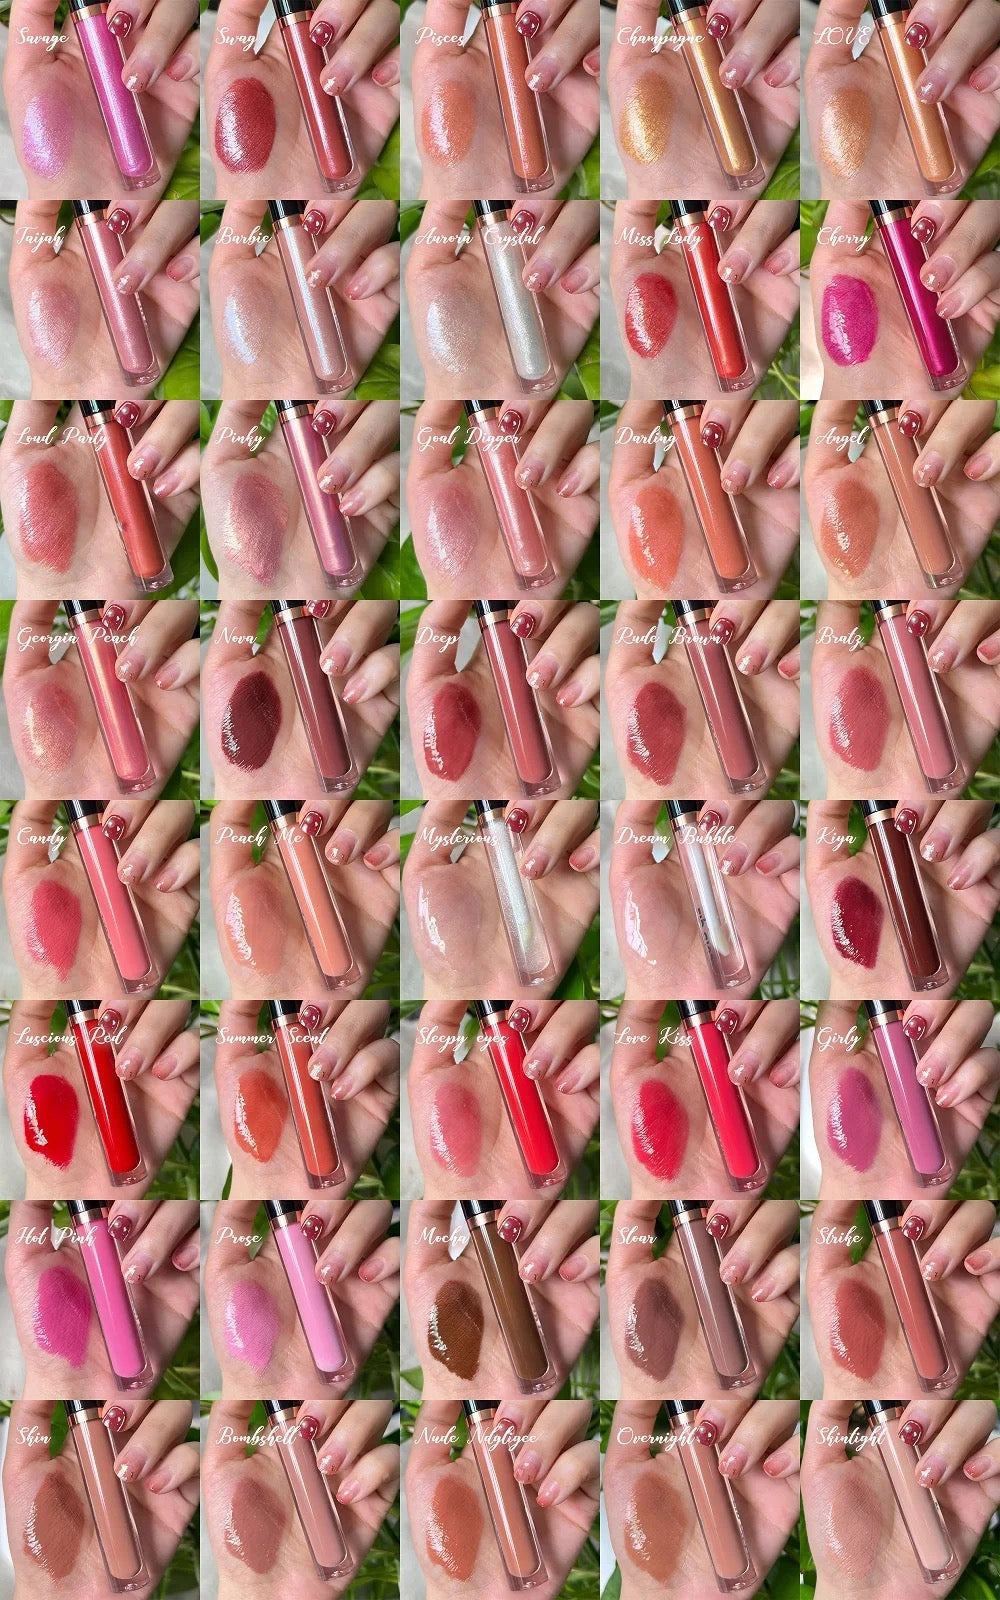 25 Private Label Lipglosses | Start a Business under $100